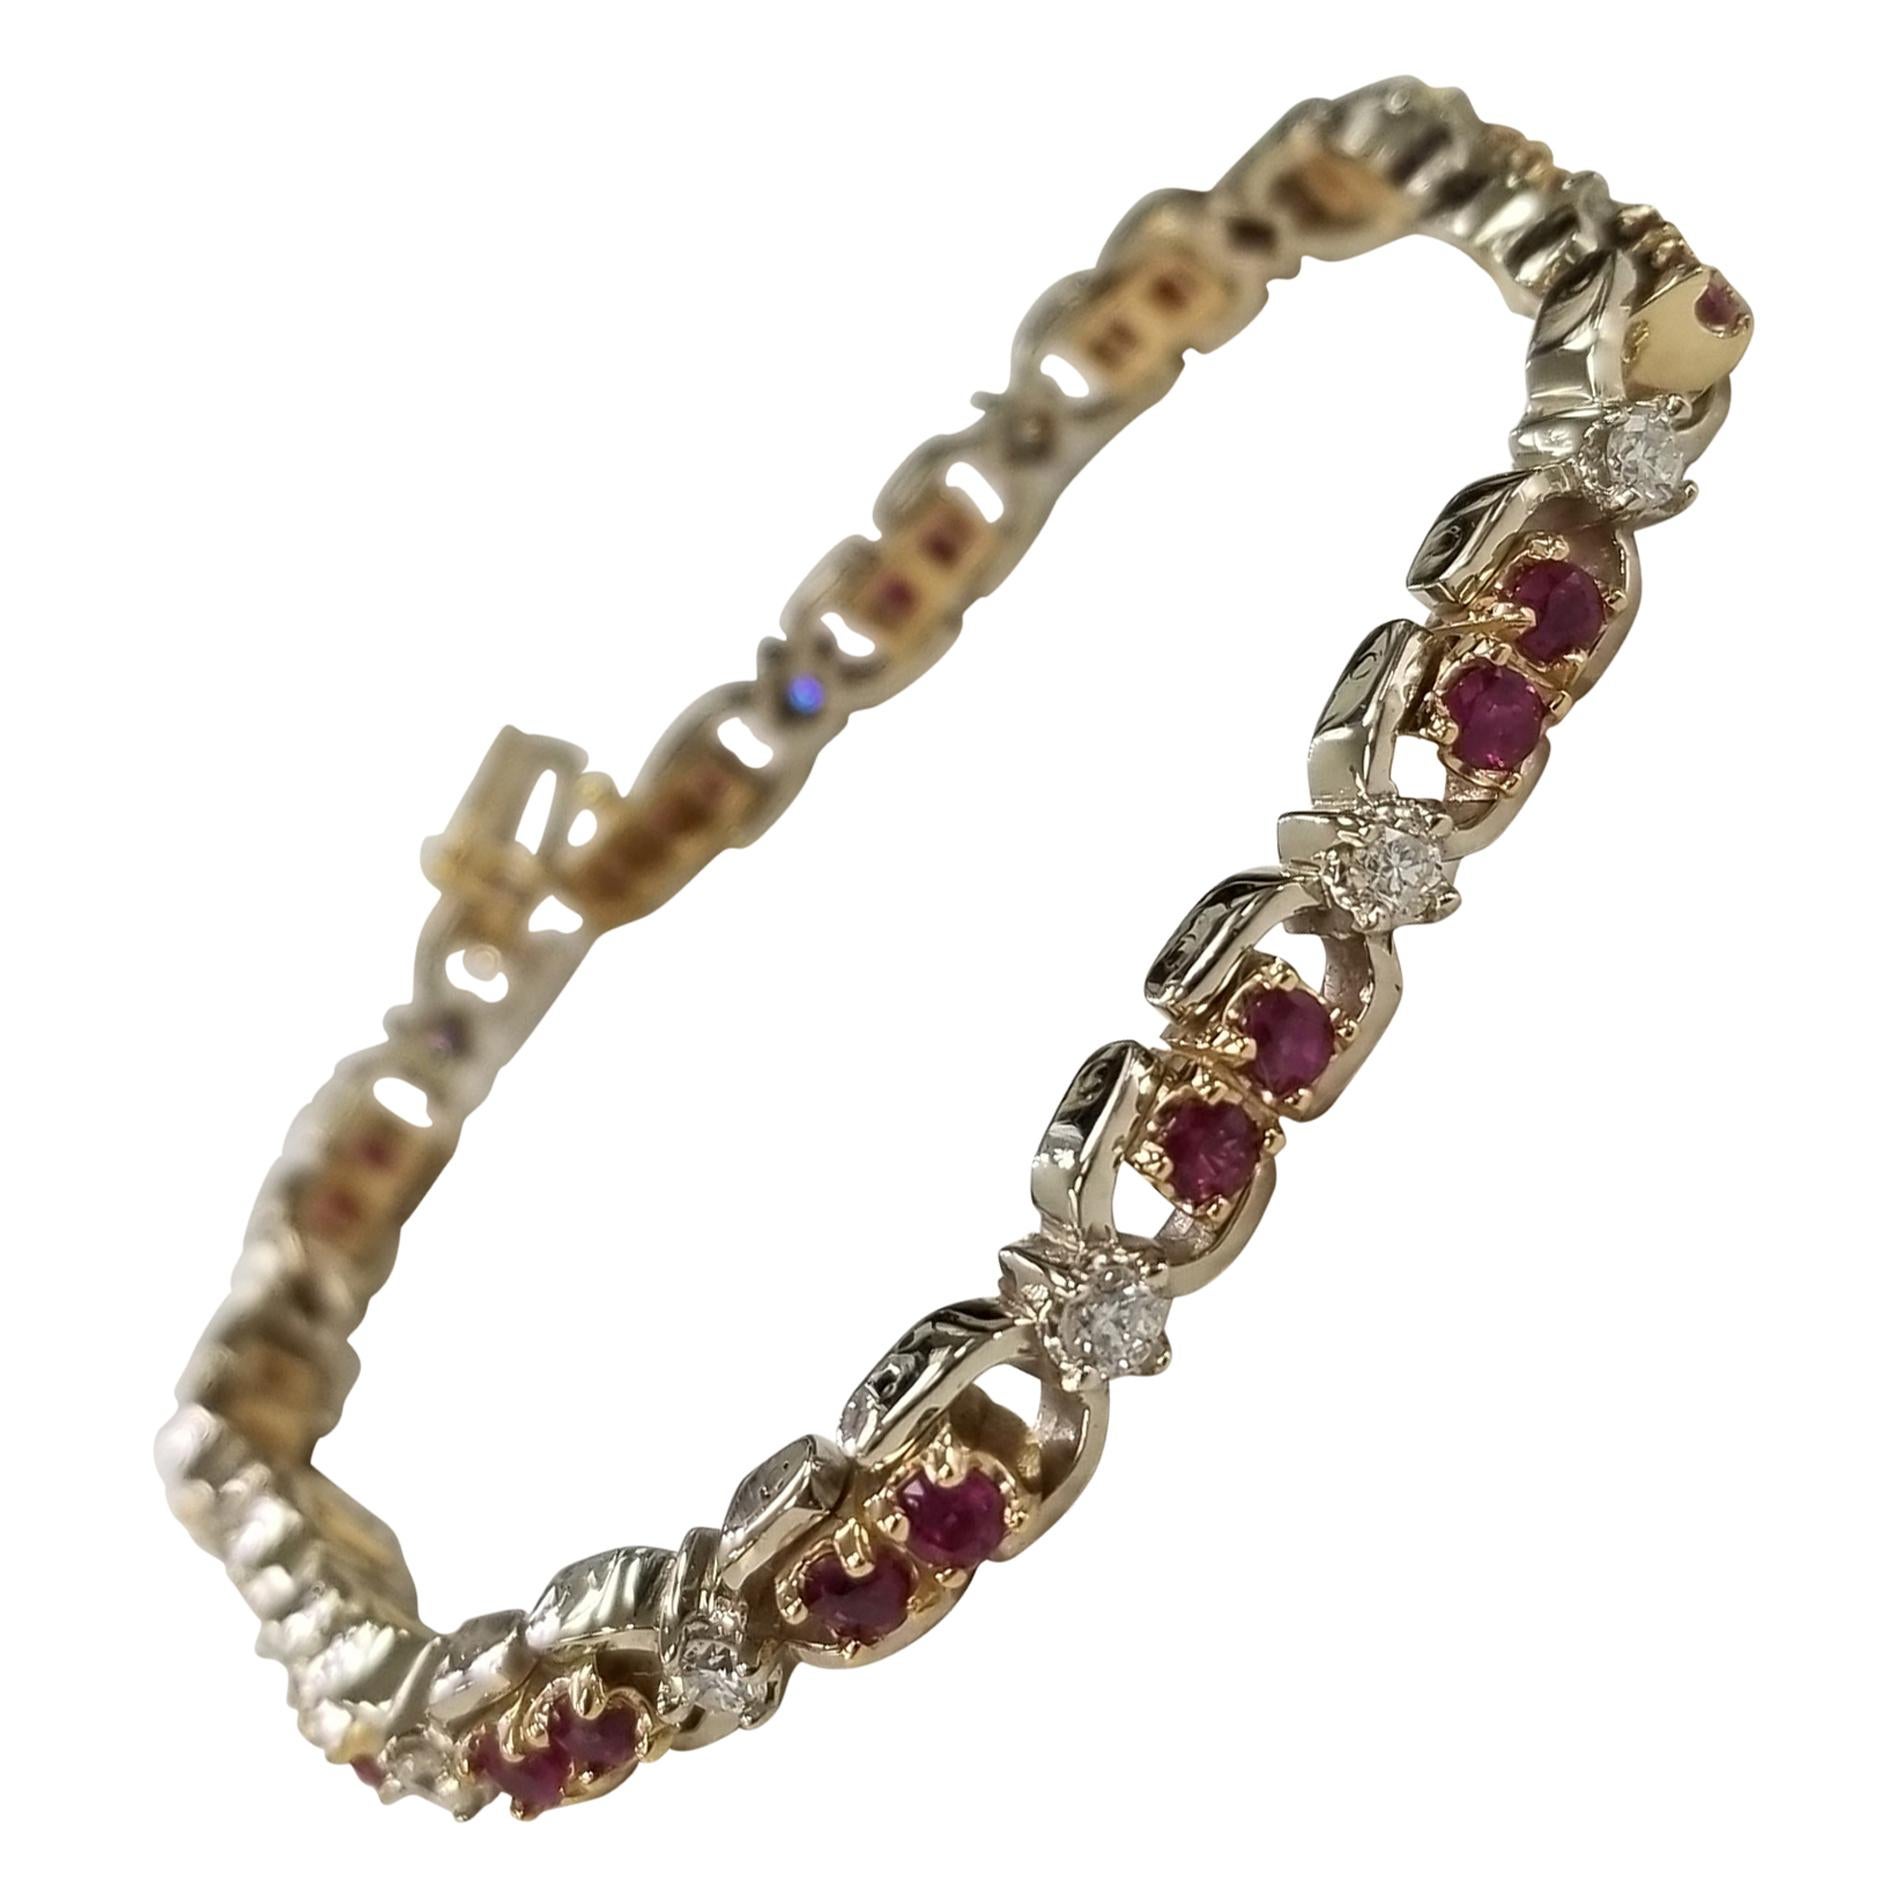 14k 2-Tone Gold Oval Ruby and Diamond Bracelet, Containing 25 Oval Rubies of Gem For Sale